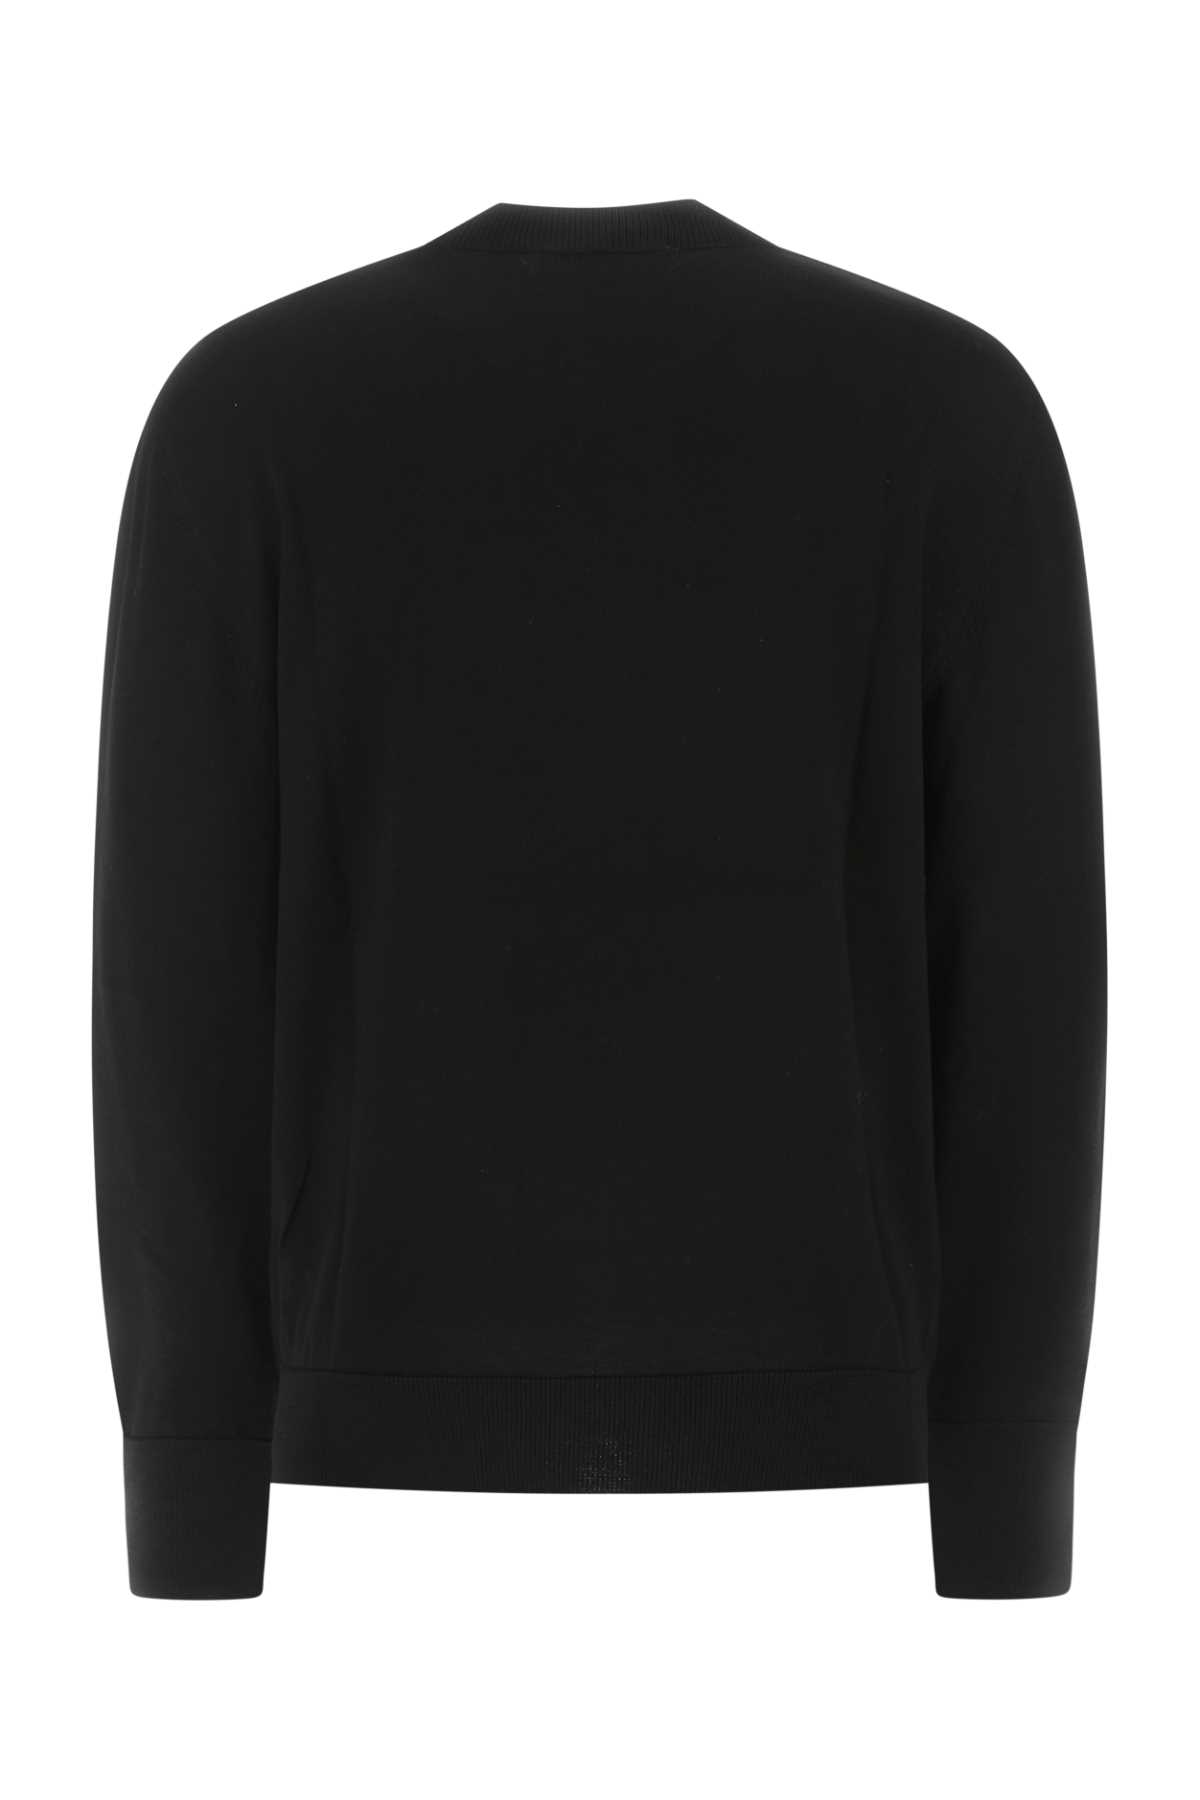 Versace Jeans Couture Black Wool Sweater In K42